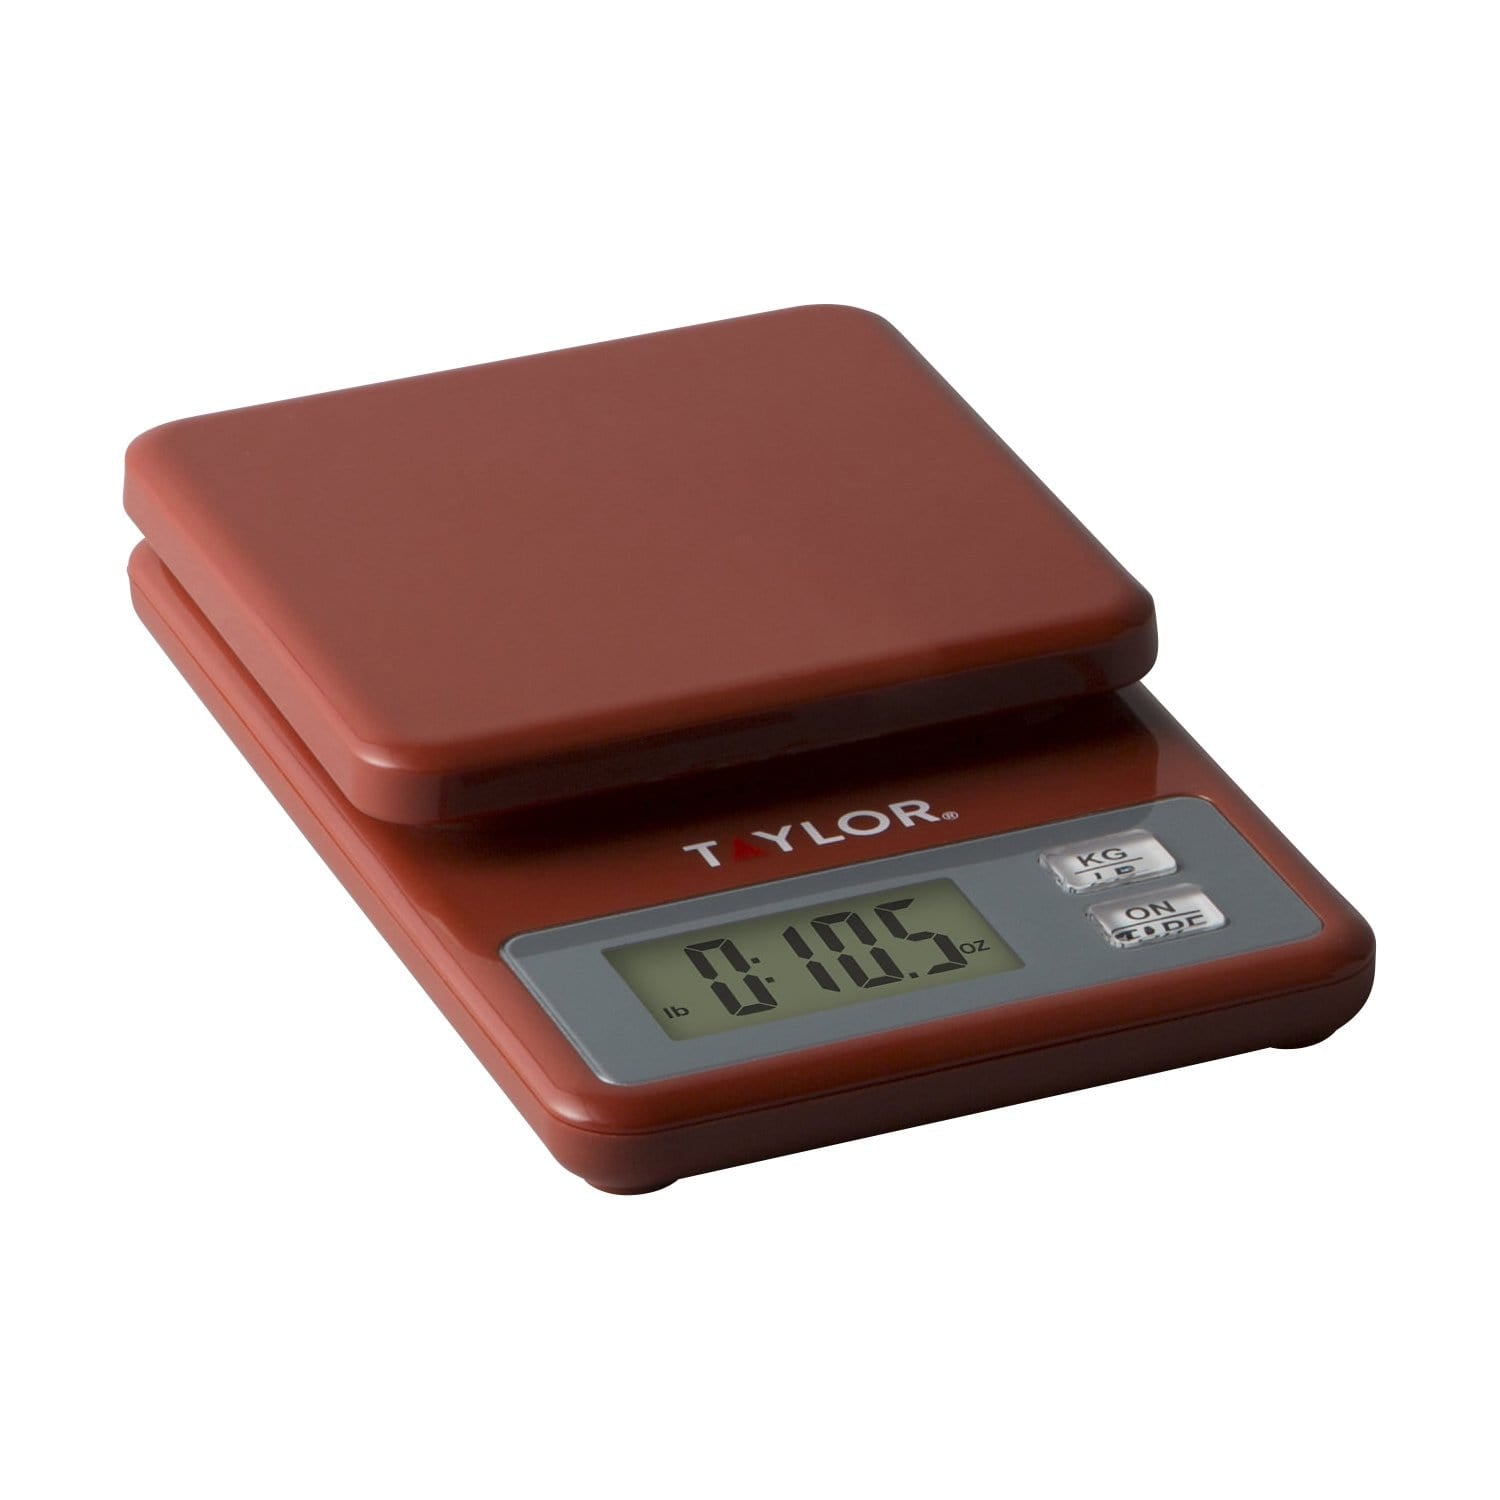 Compact Digital Kitchen Scale, 3817